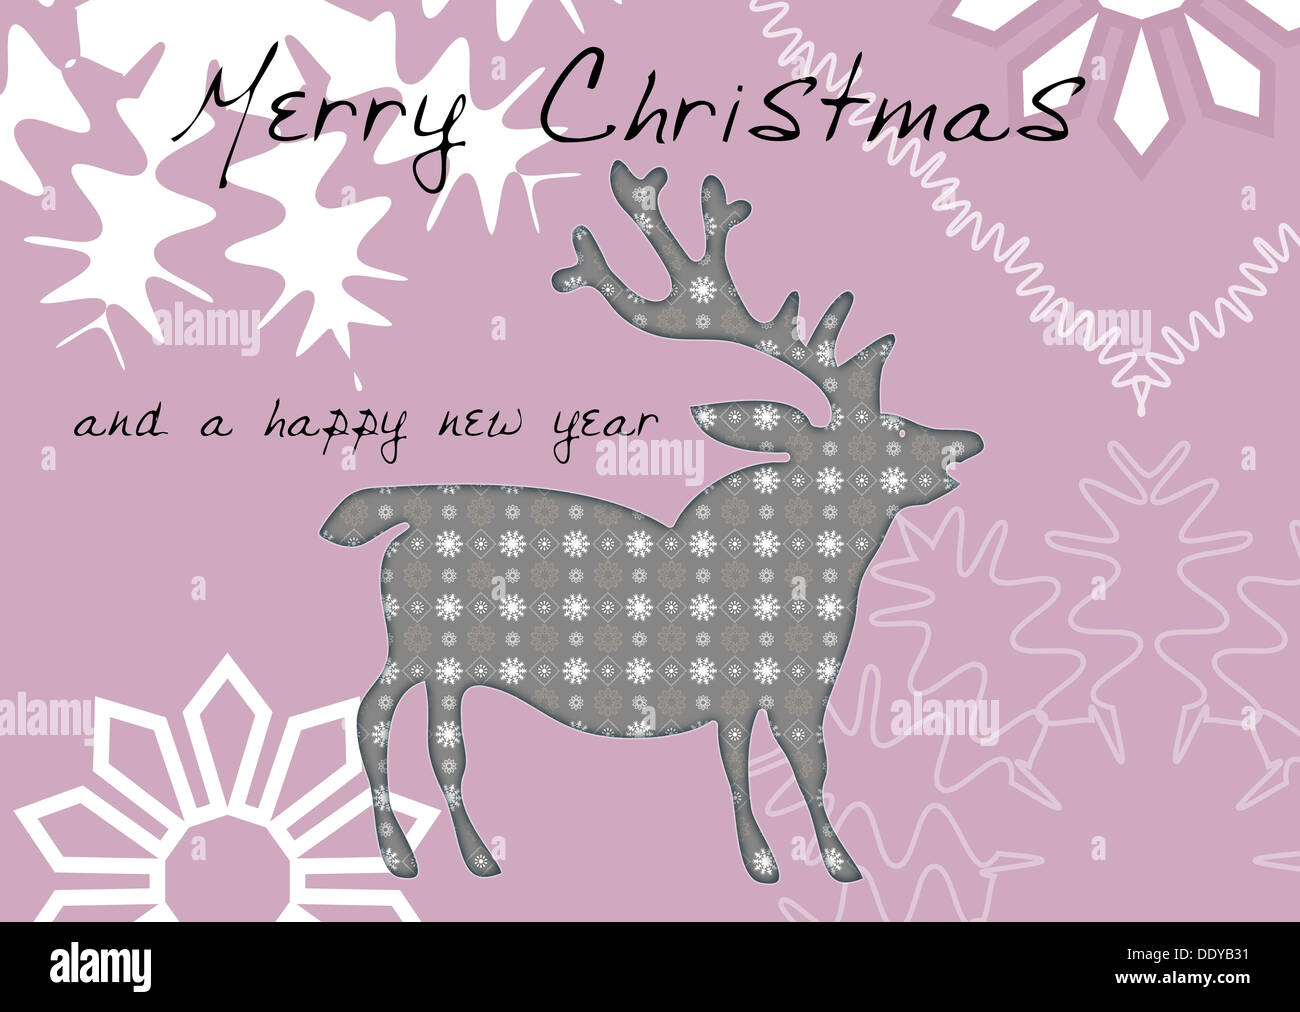 Christmas card 'Merry Christmas and a Happy New Year', stag or hart, illustration Stock Photo